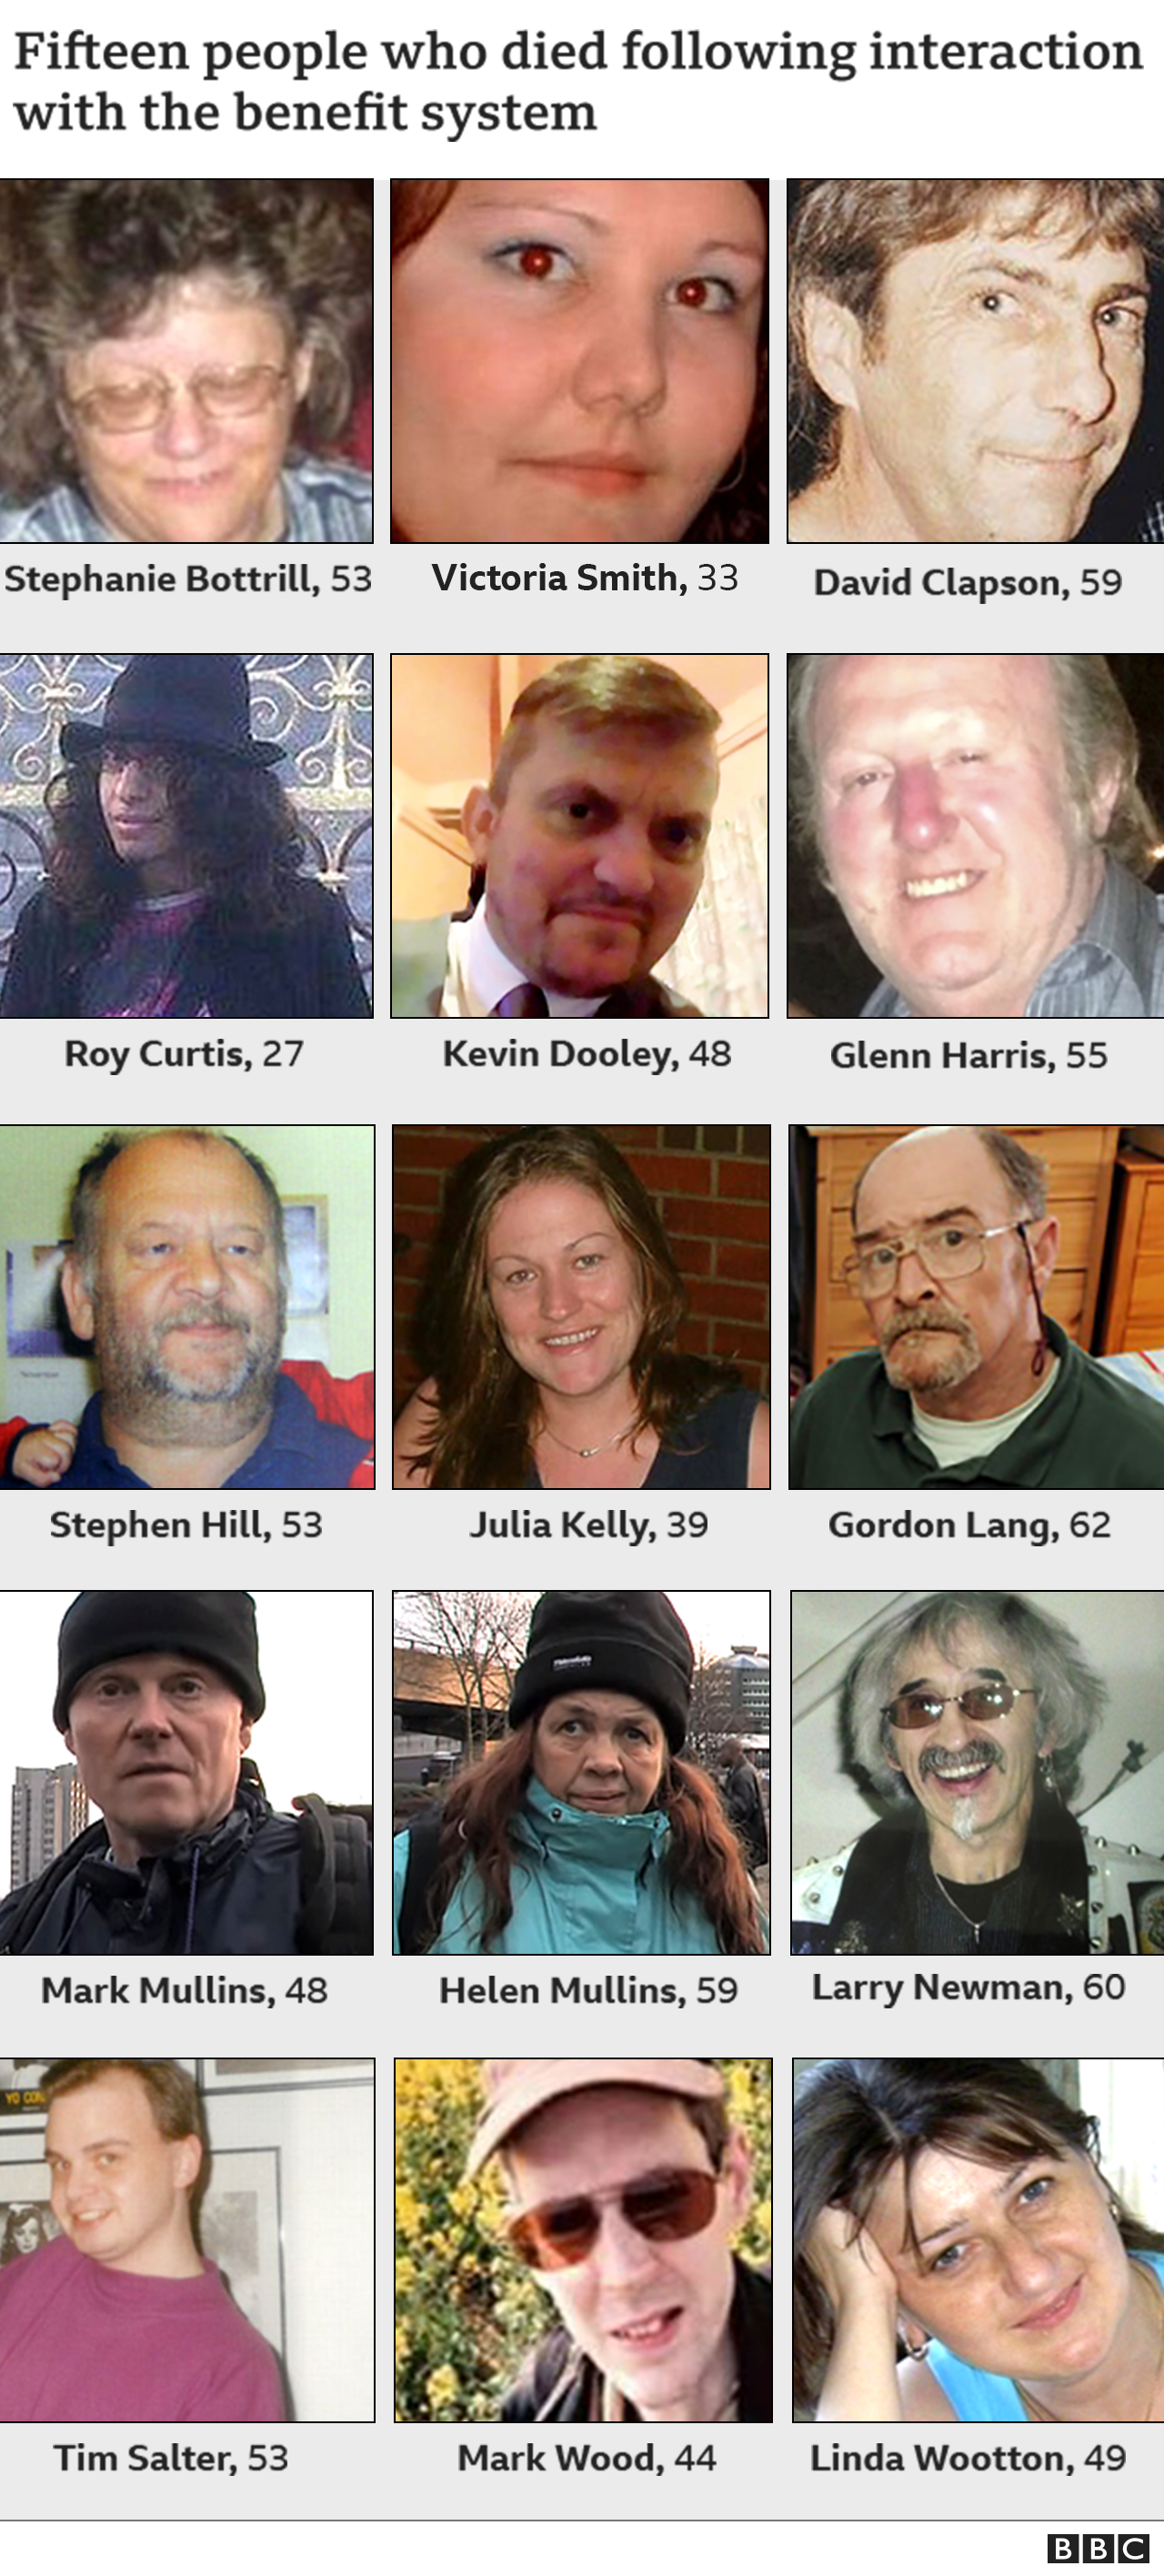 Photos of 15 people who died following interaction with the benefit system